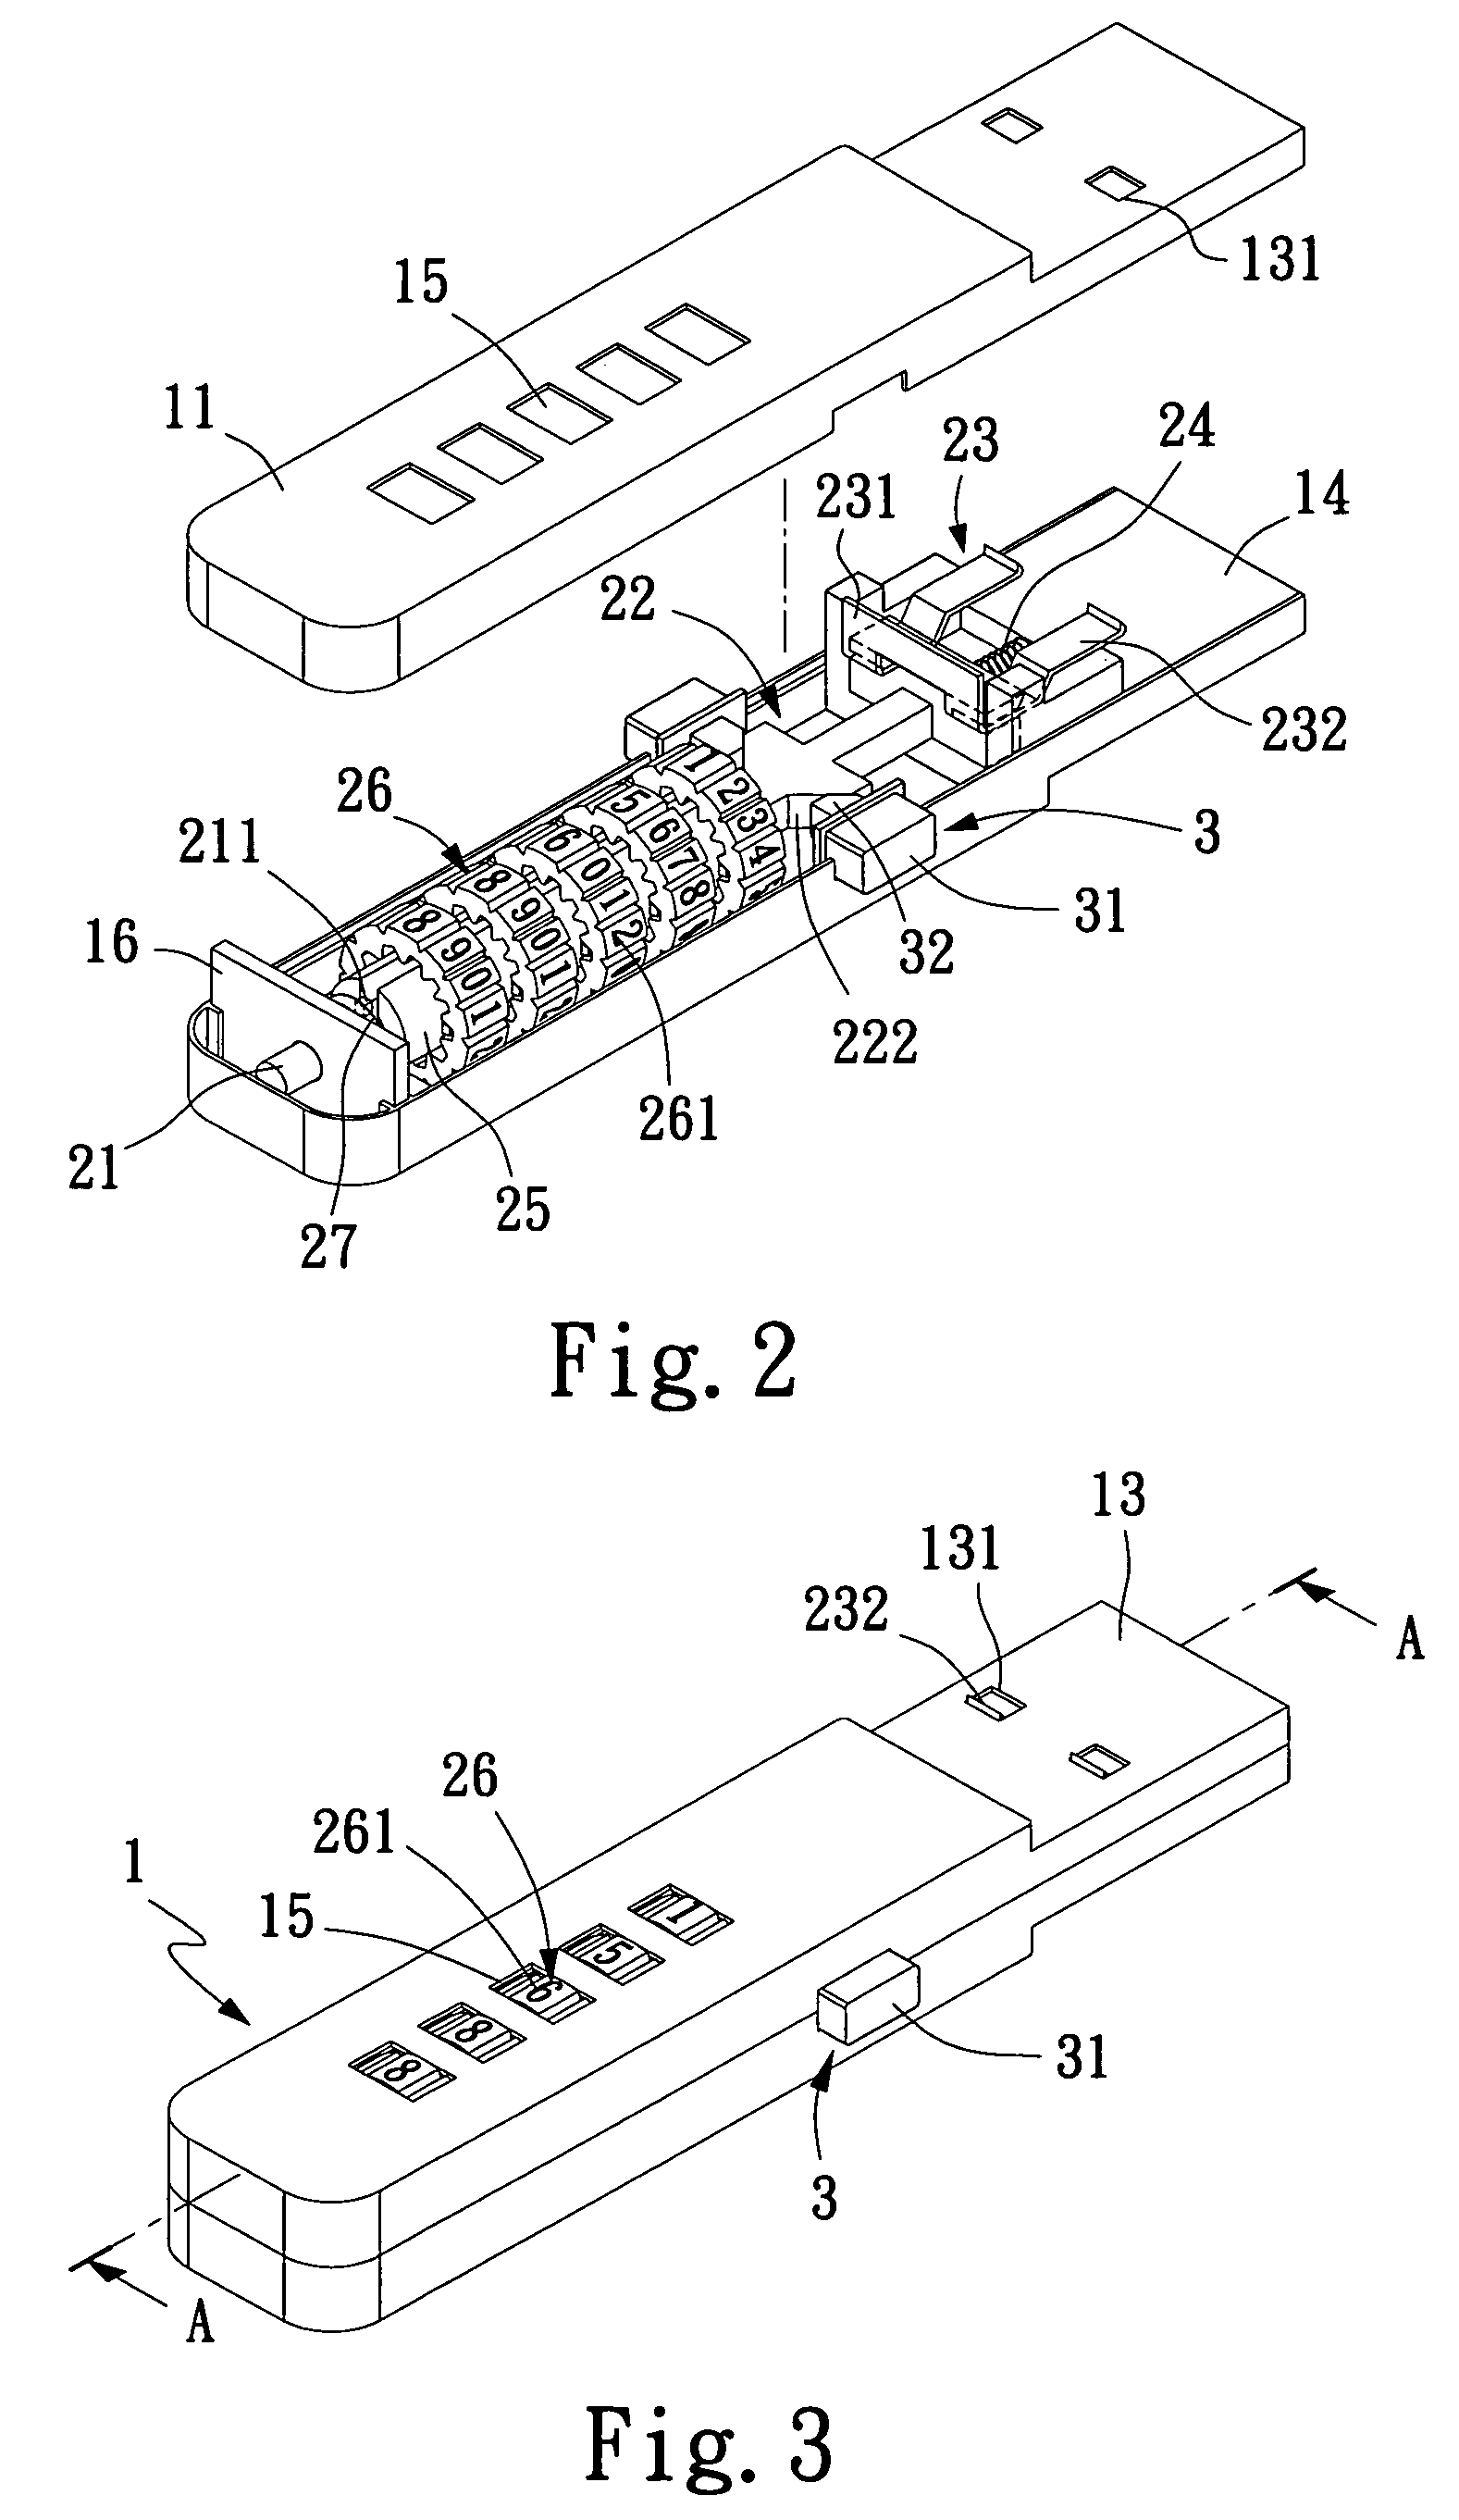 Locking device with changeable combination of numerals for locking a connecting port on a computer